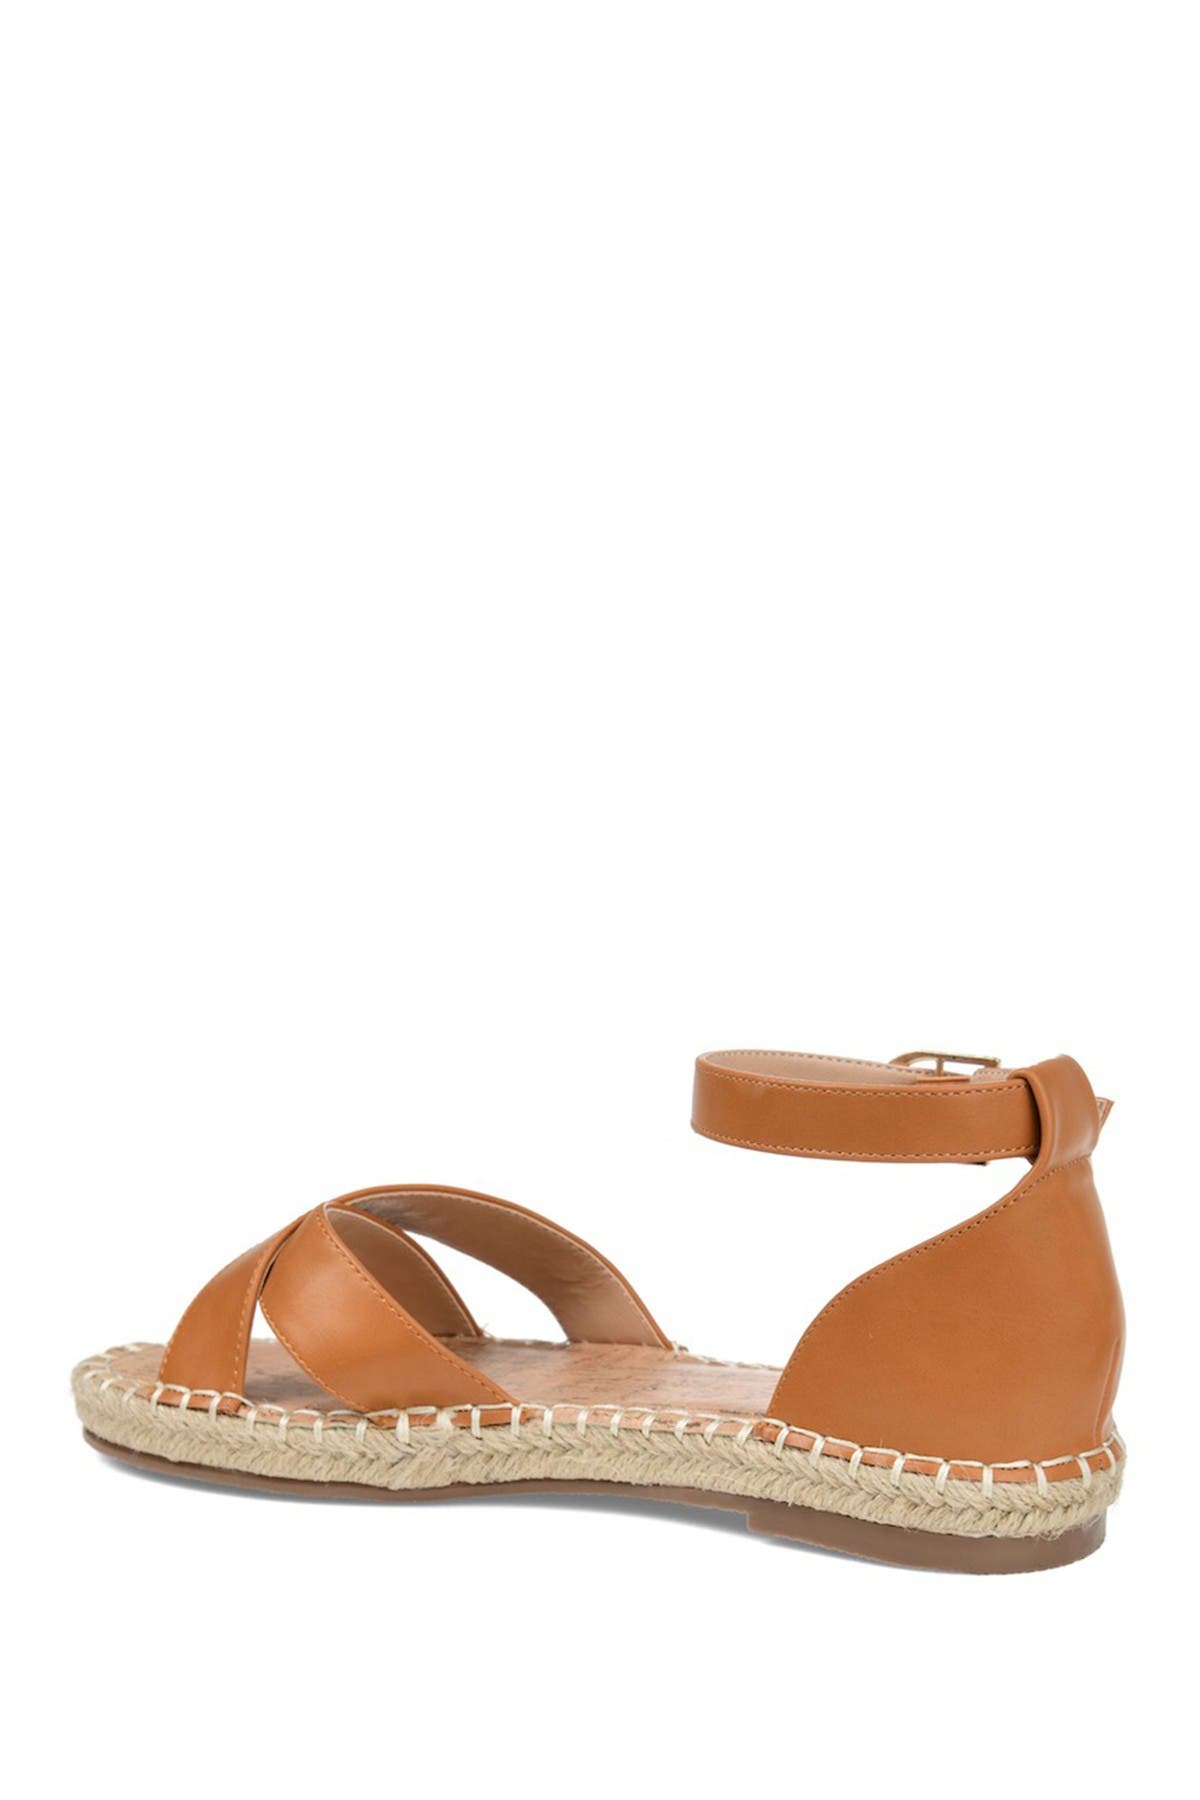 Journee Collection Lyddia Espadrille Sandal In Rust/copper1